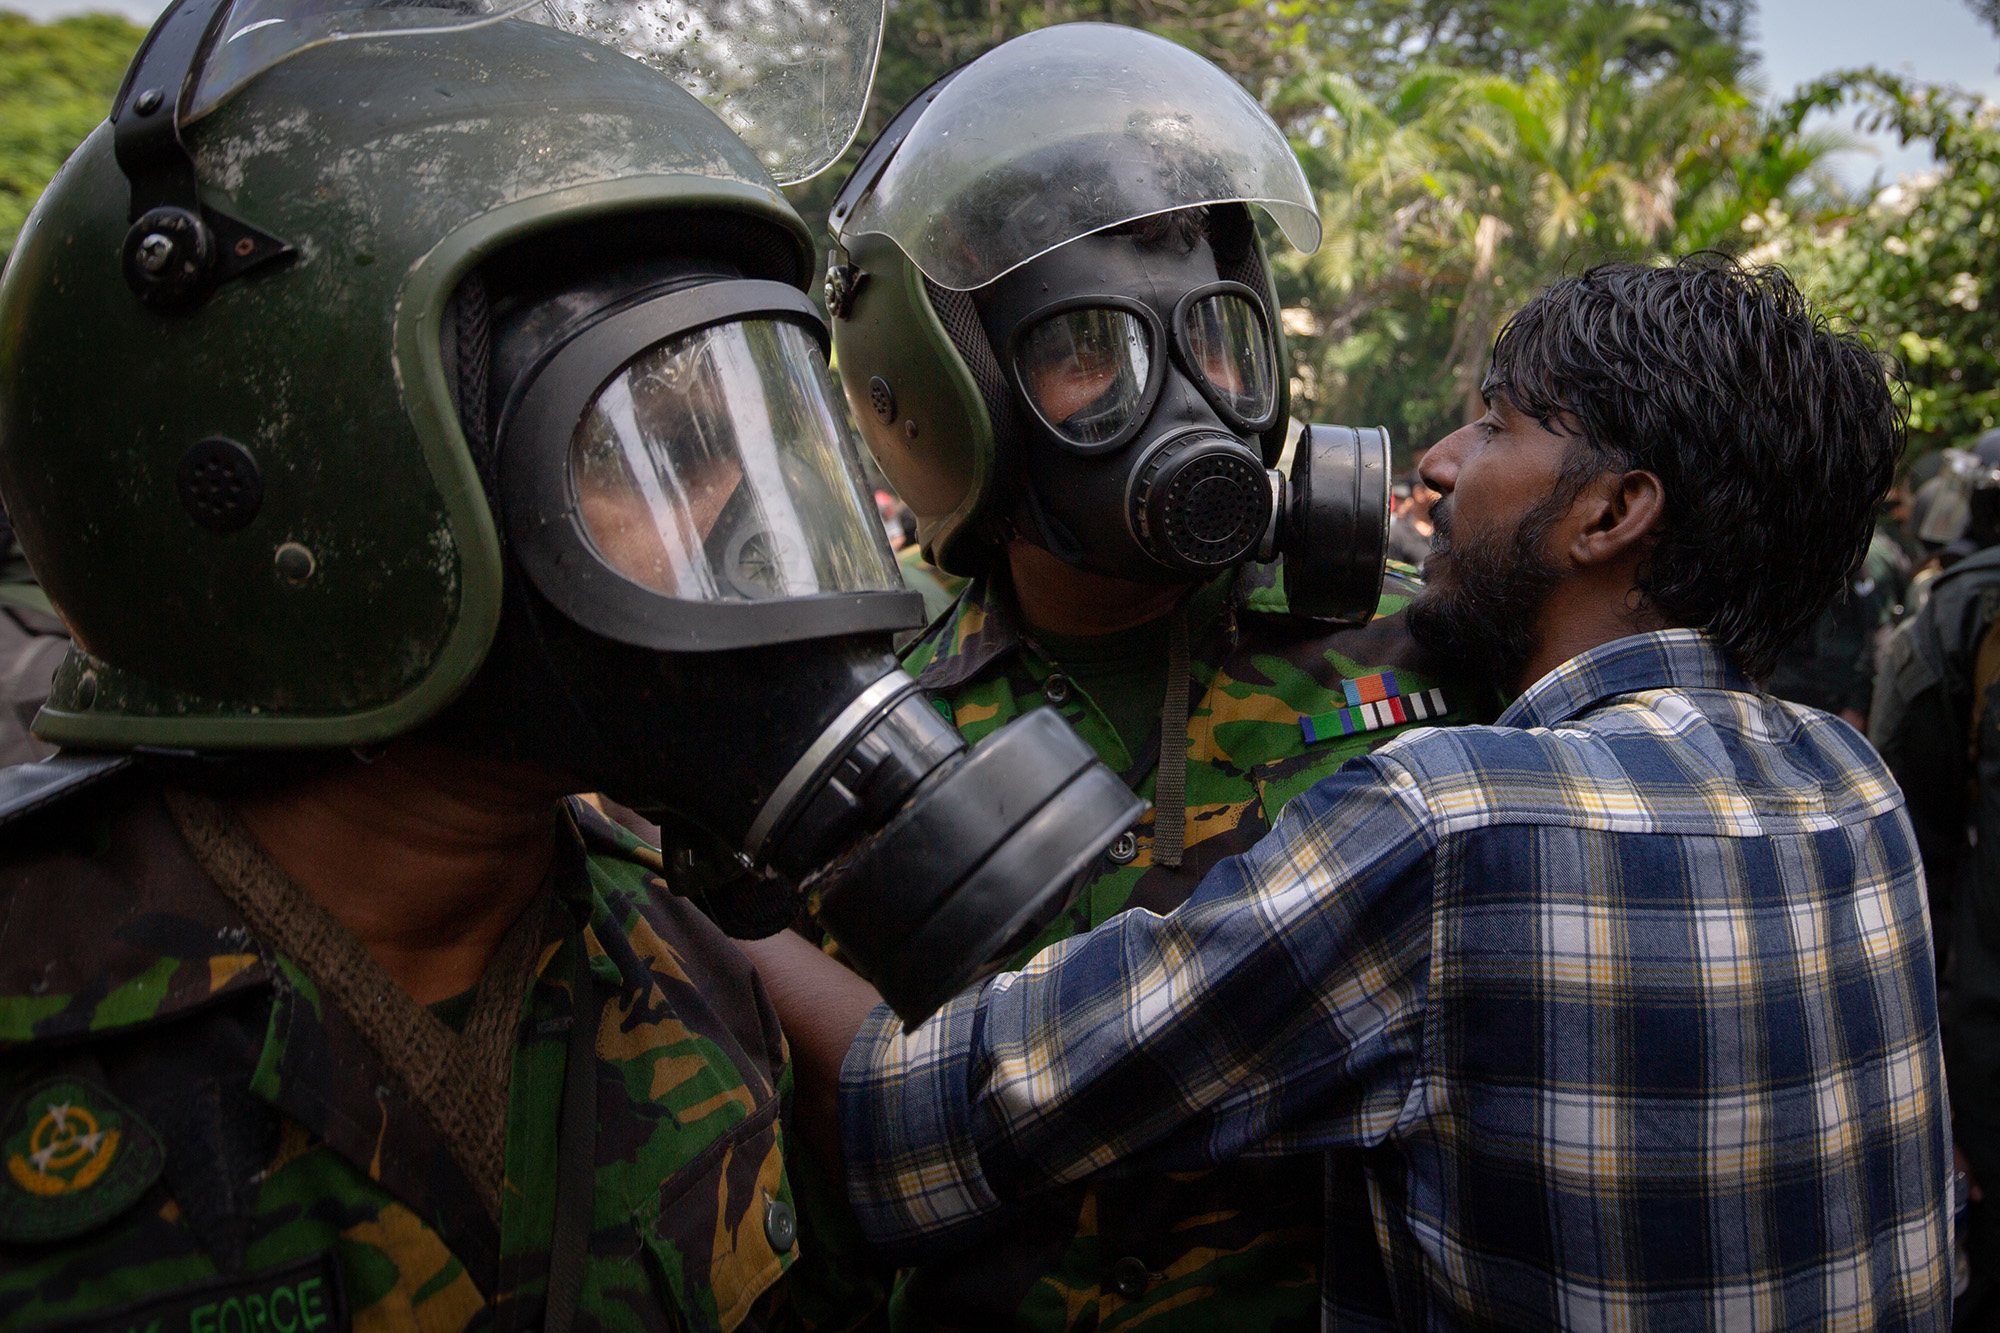 A protester confronts soldiers during a protest outside the office of Sri Lanka's Prime Minister Ranil Wickremesinghe on July 13, in Colombo, Sri Lanka. 